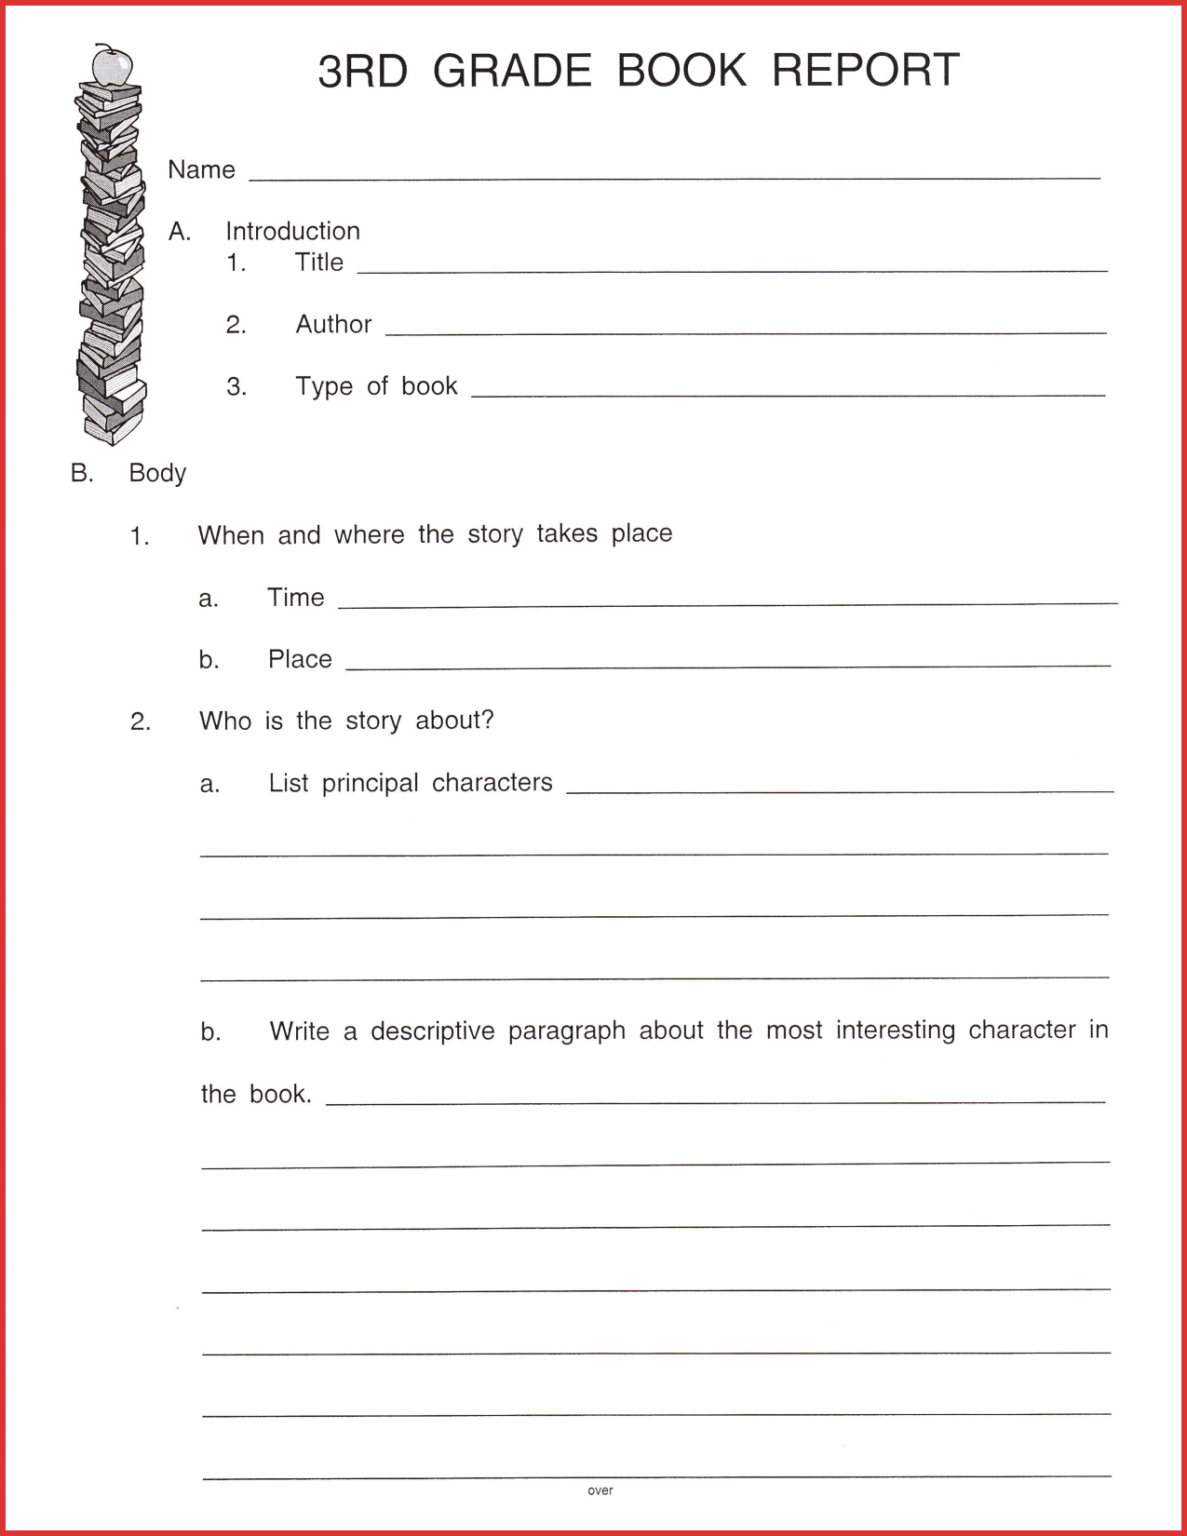 Wondrous Free Book Report Templates Template Ideas Forms For In Second Grade Book Report 